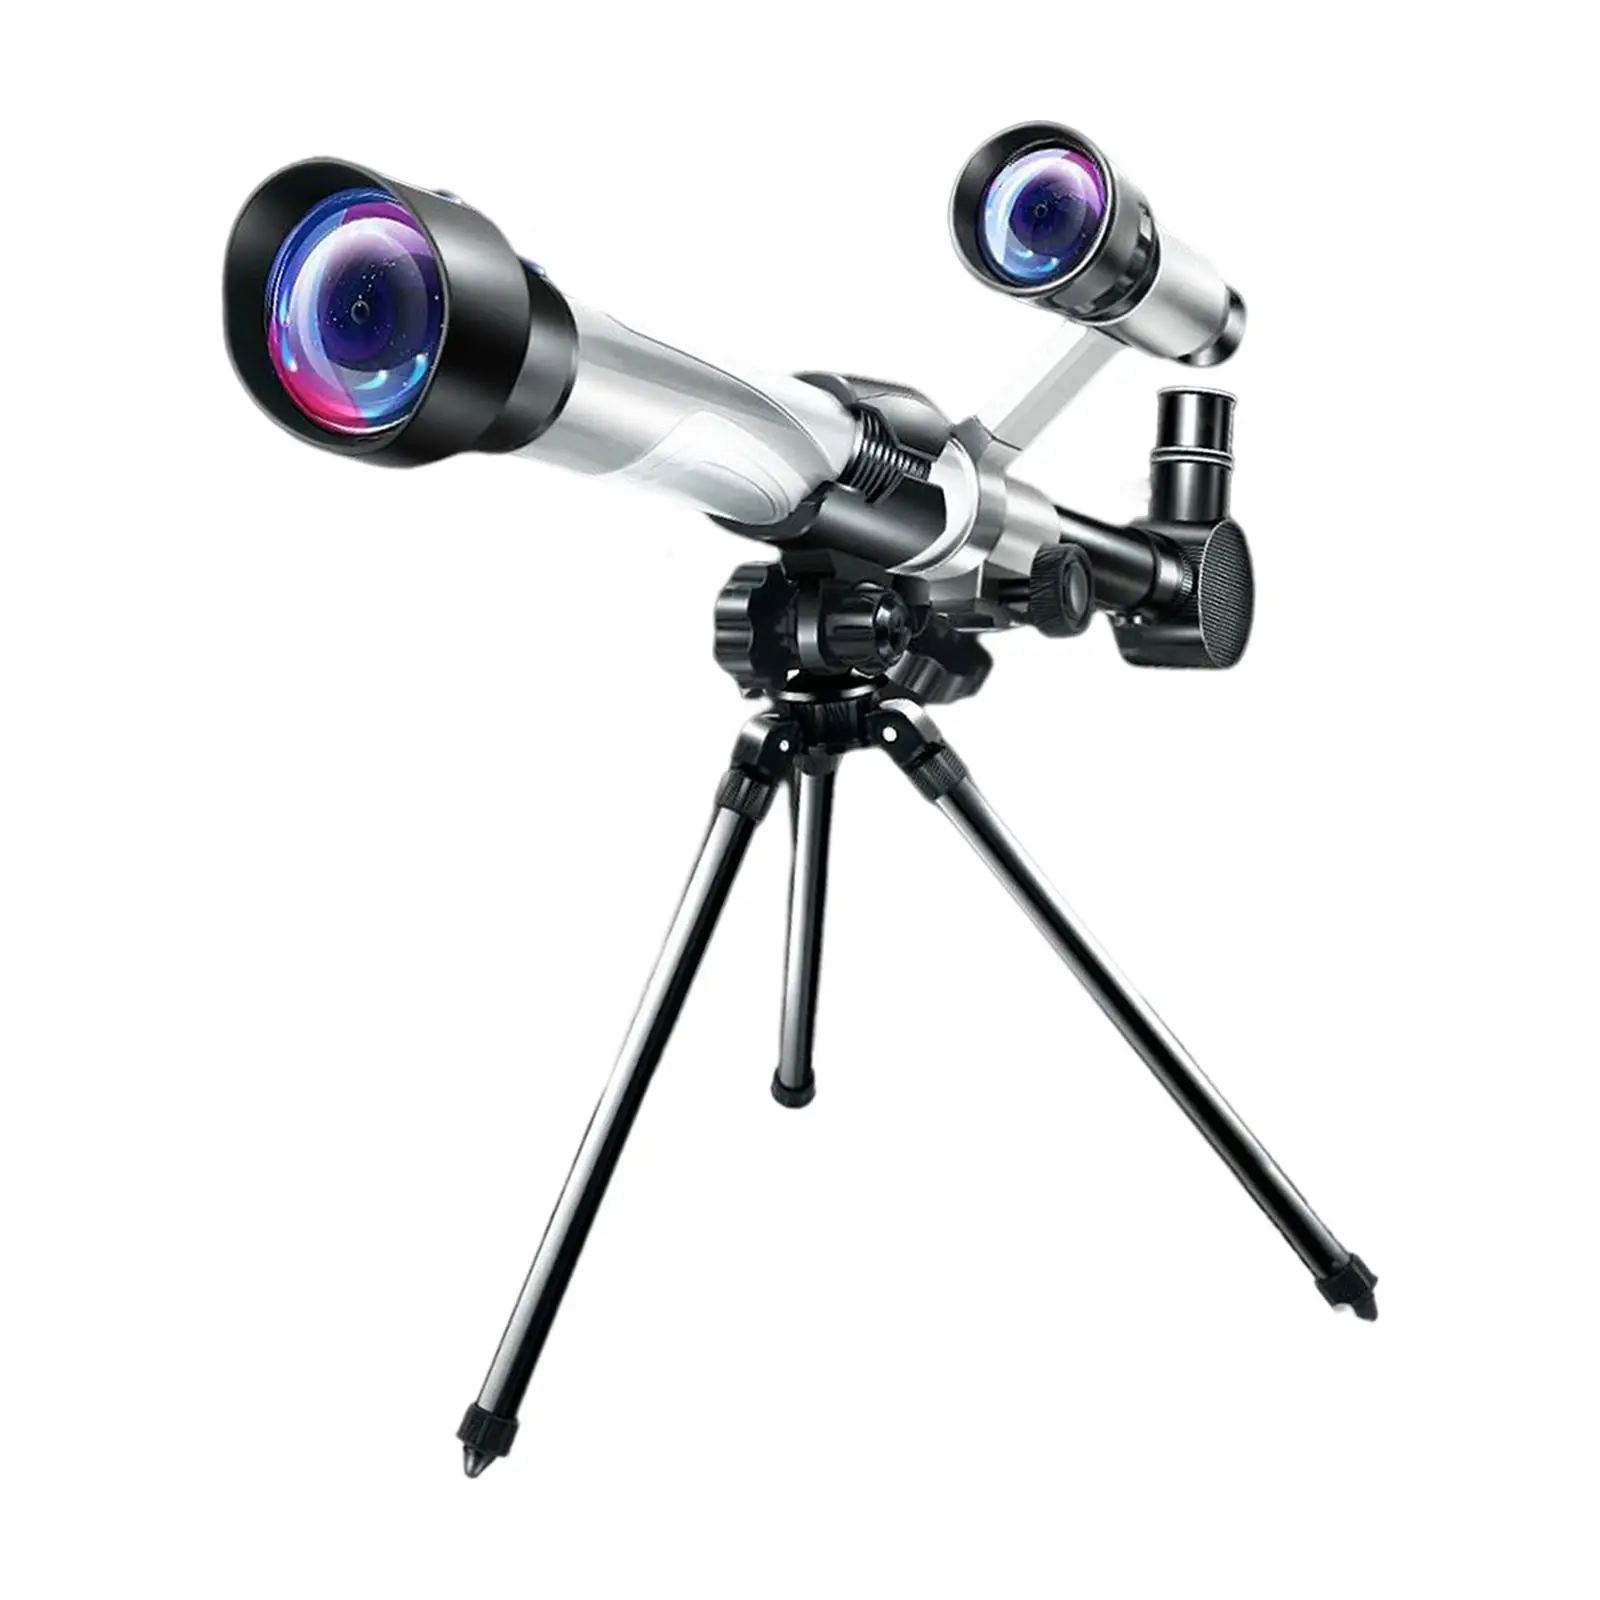 Portable 60mm Caliber Telescope with Finder Scope Tripod for Kids Fully Multi Coated Optics Panning Handle Durable Accessories